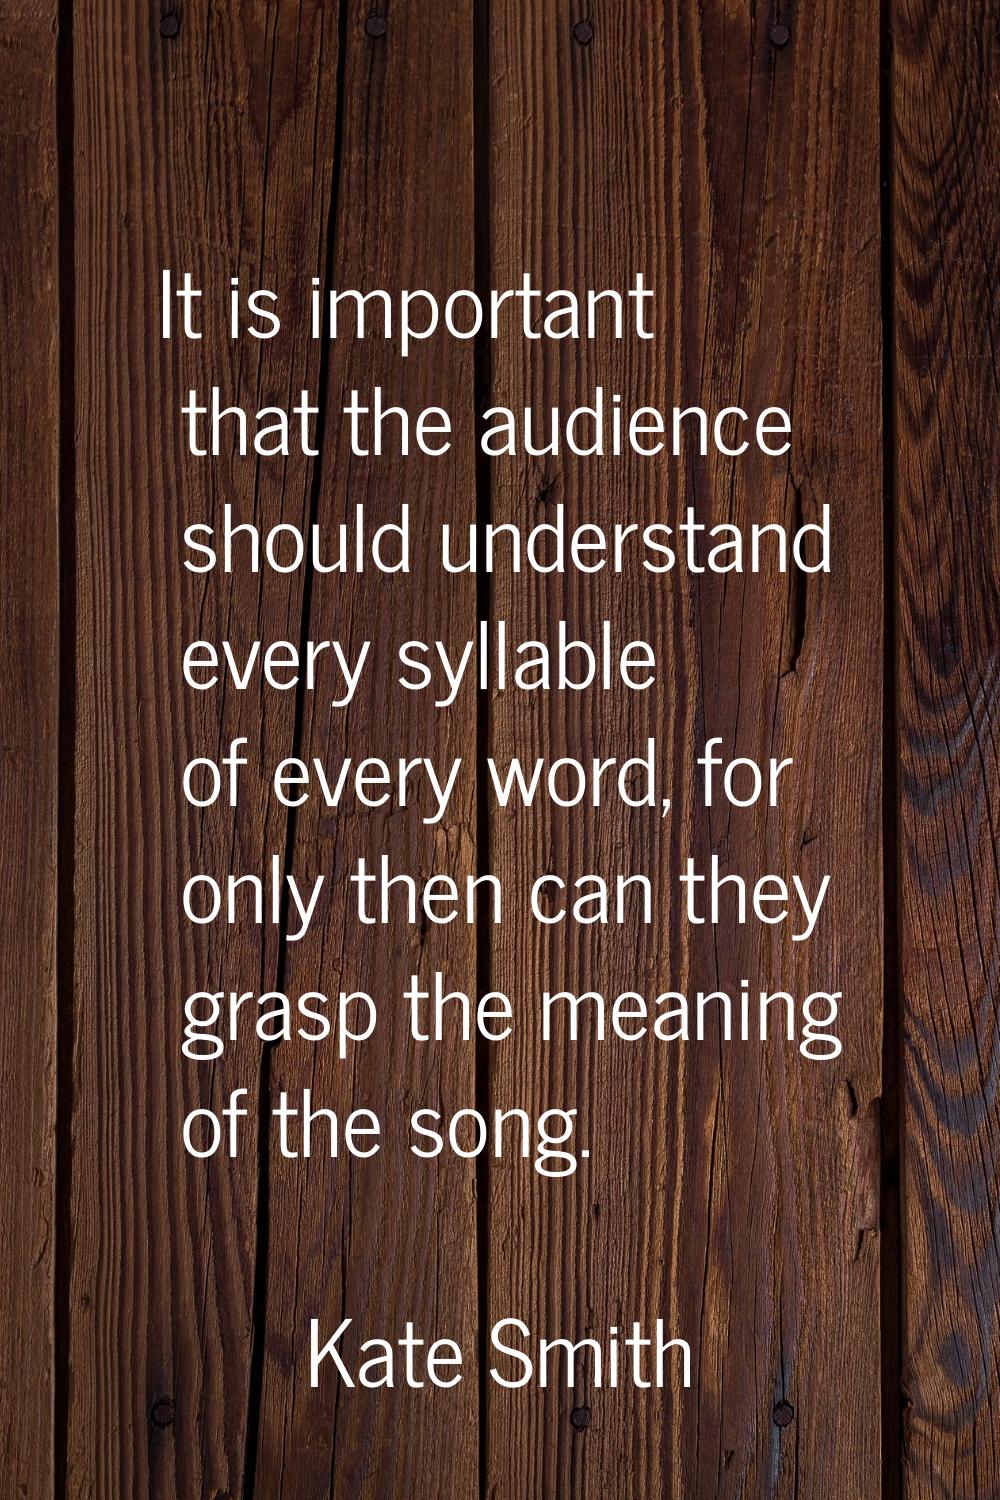 It is important that the audience should understand every syllable of every word, for only then can